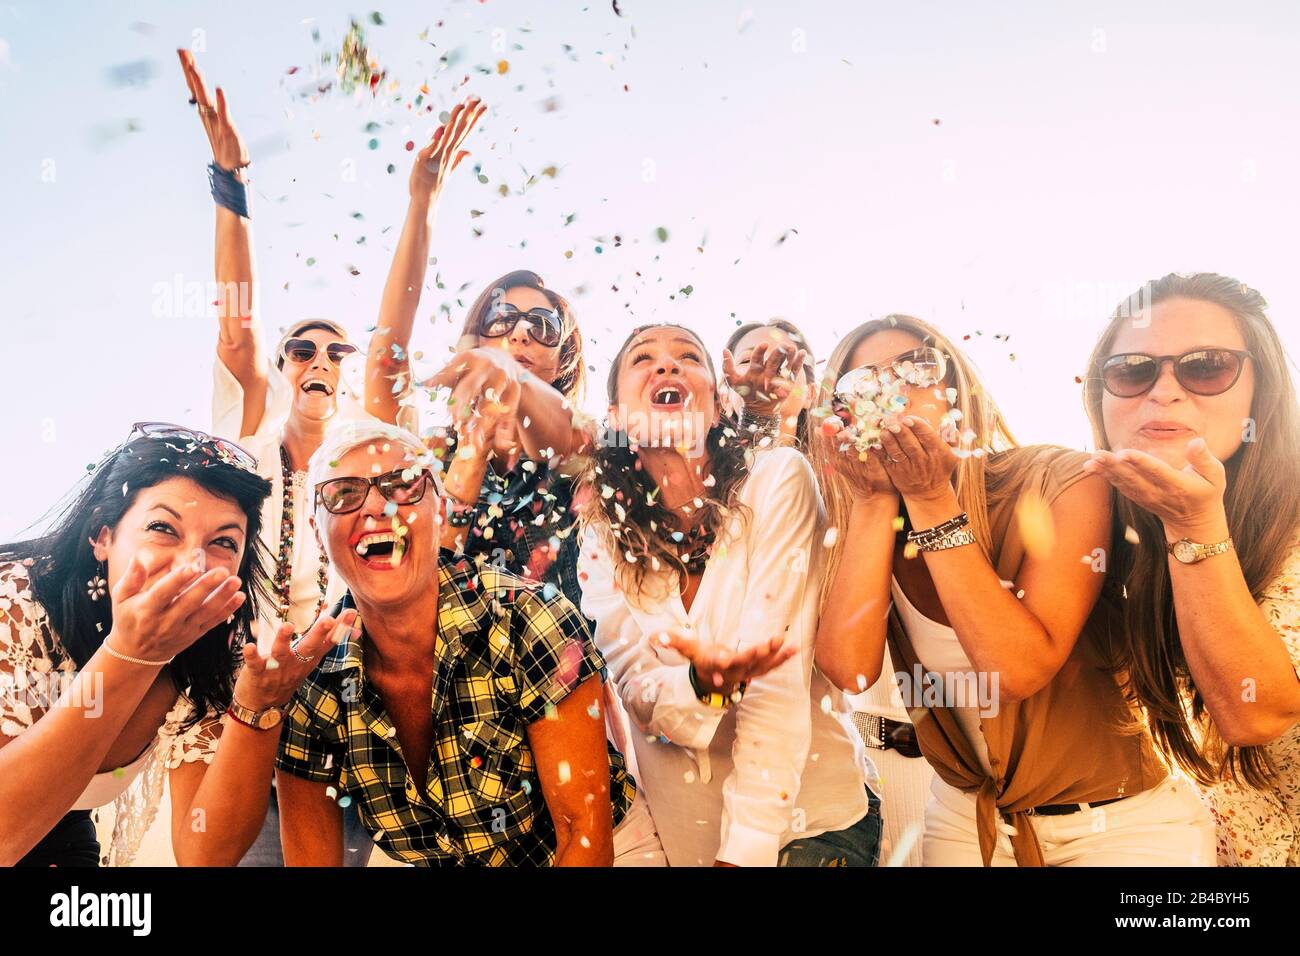 People having fun in party celebration friends concept - group of young and adult women all together laughing blowing coloured confetti - friendship and love for lifestyle with mixed active generations Stock Photo